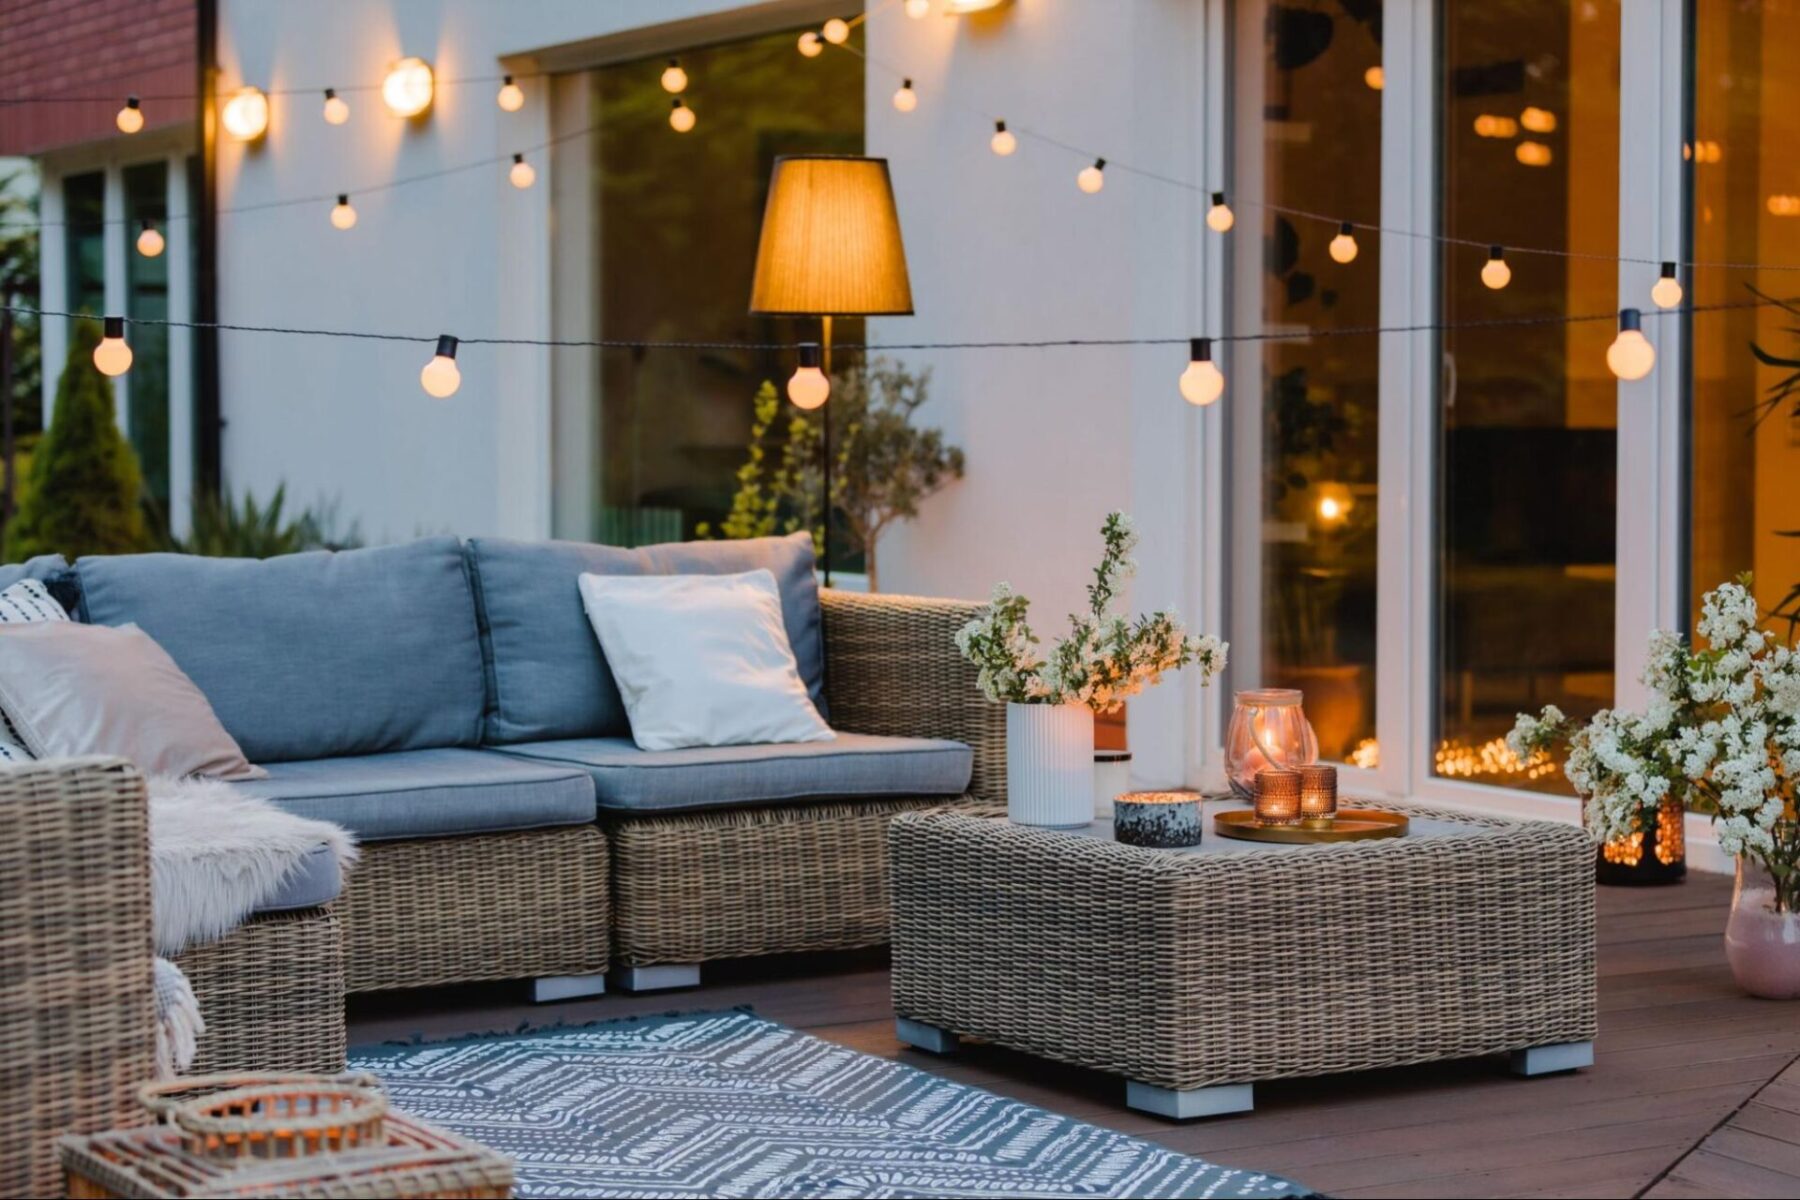 6 Winter Patio Ideas to Make Your Patio Cozy in the Winter